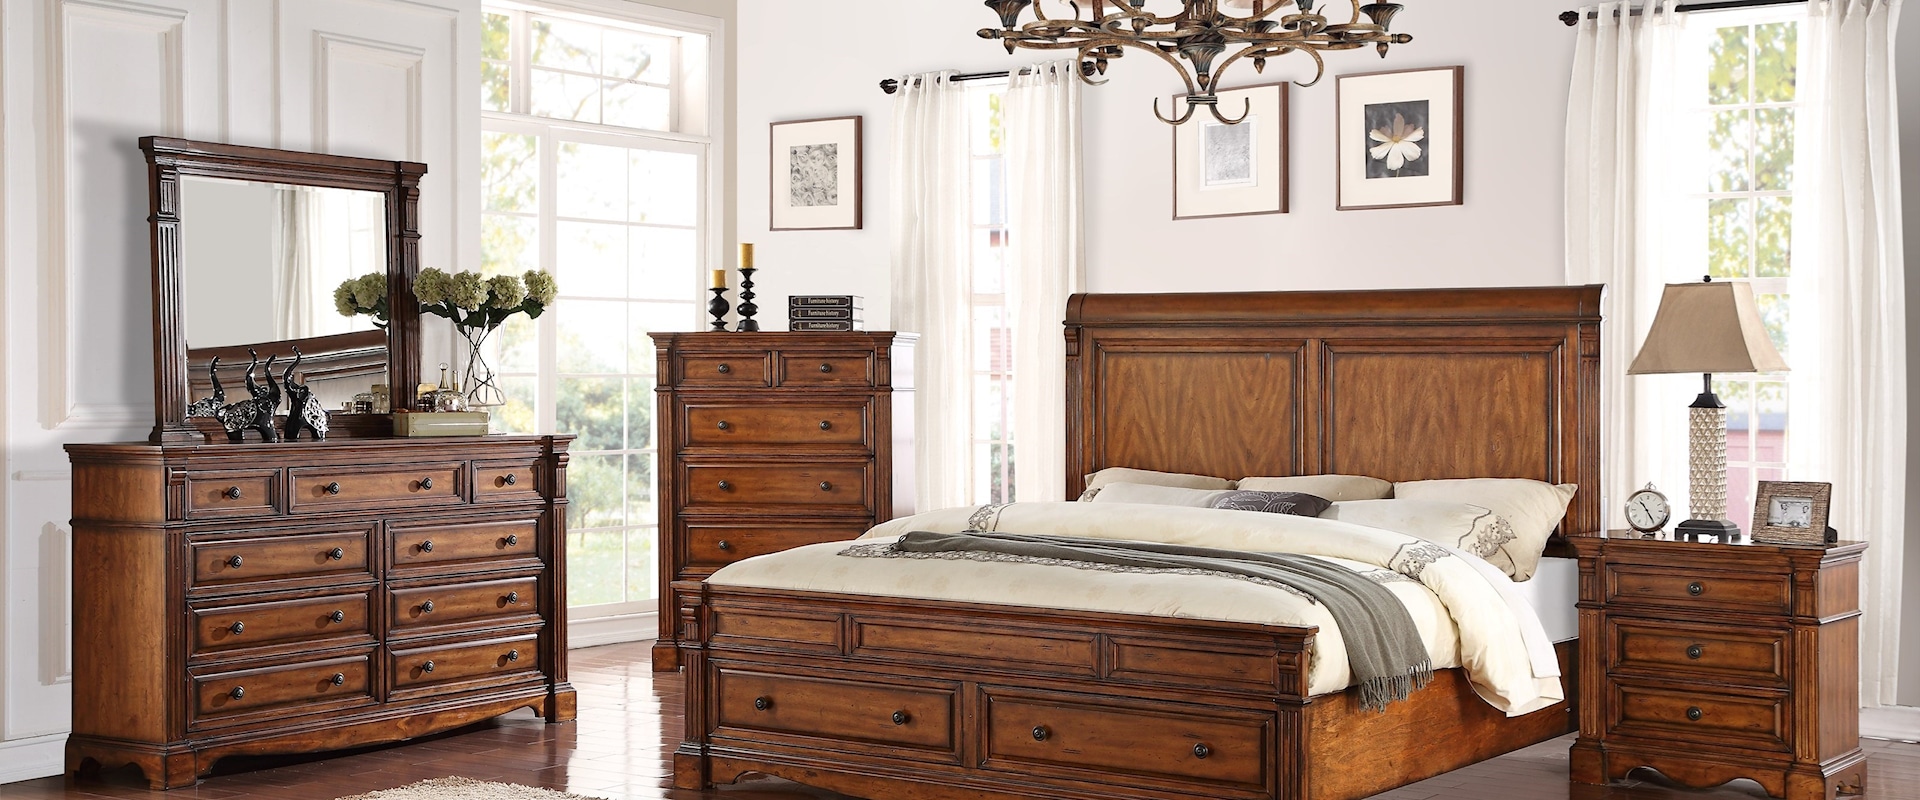 Traditional Queen Bedroom Group with Storage Bed